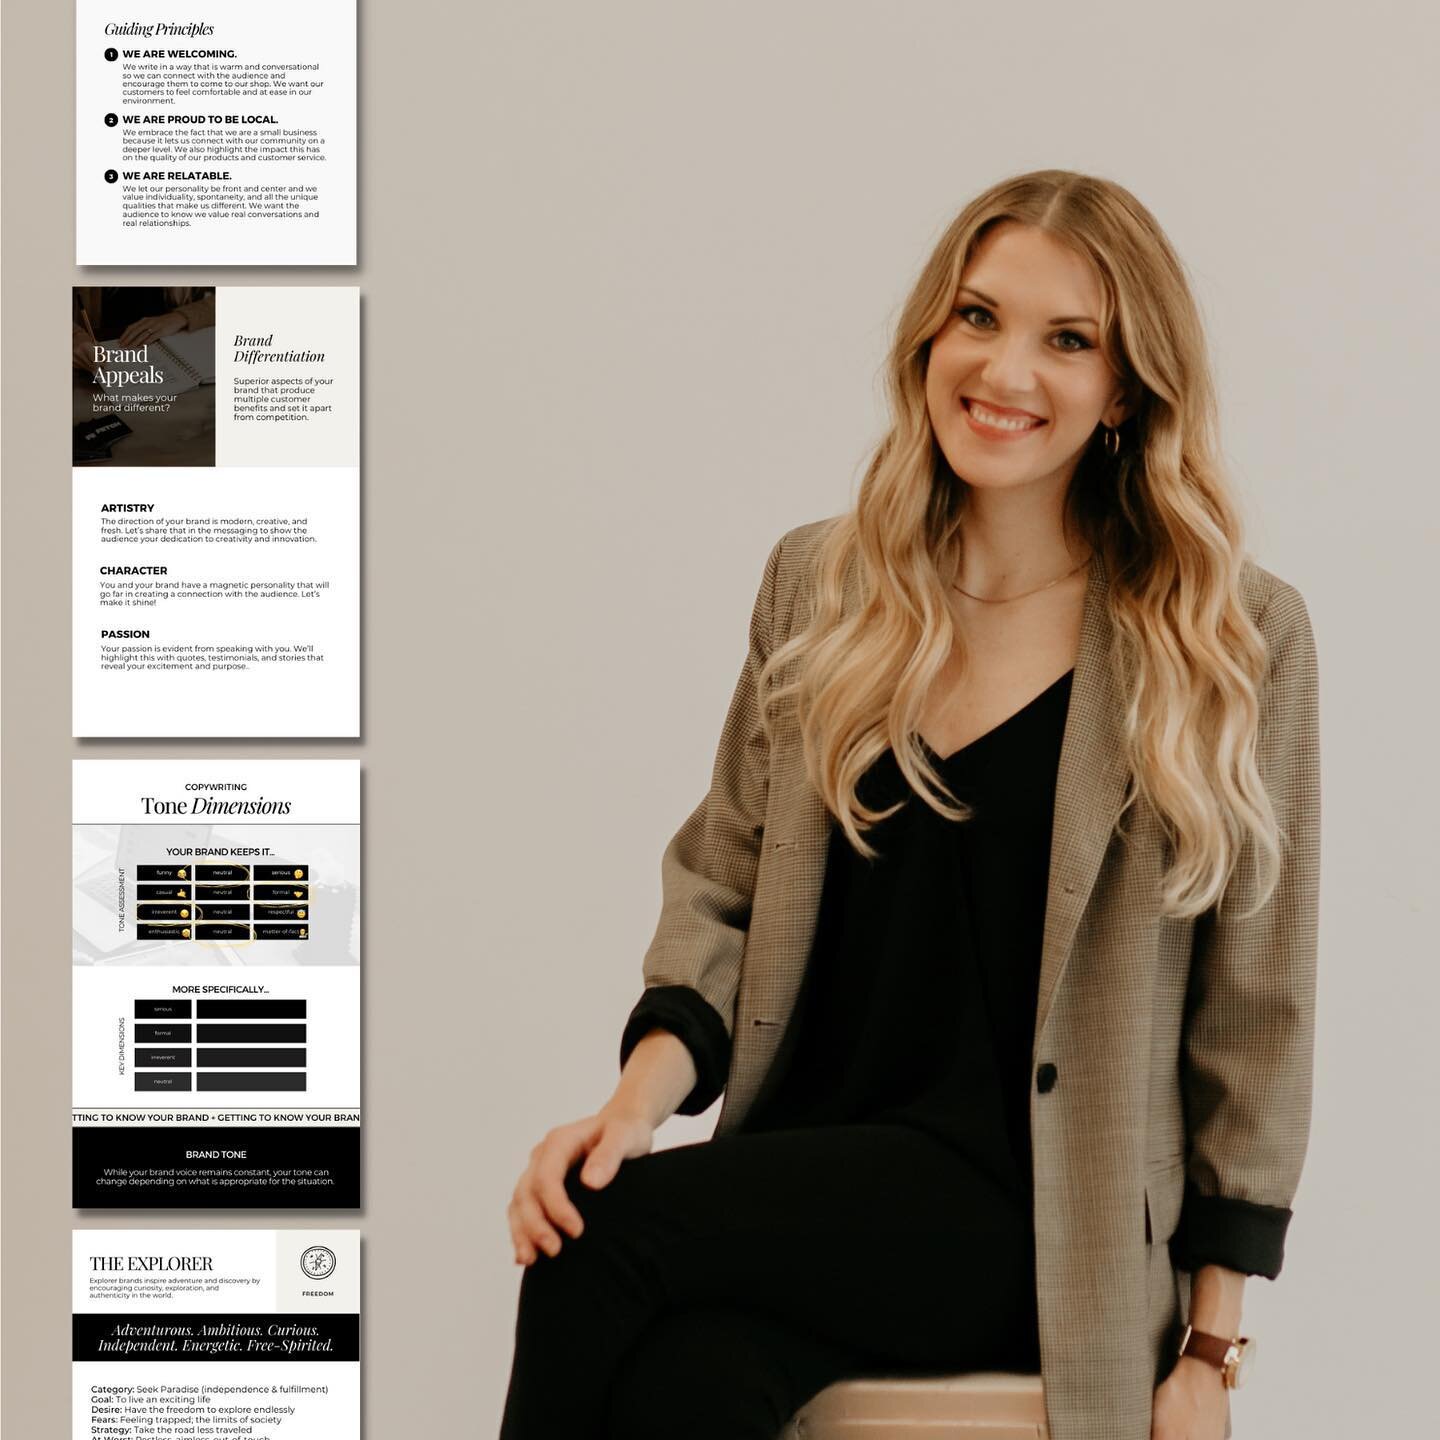 Jess is a copy WIZARD 🪄

When you get the copywriting package for your business- you get more than the copy itself- you also get a TON of behind the scenes insights for your business like:

🌟 A Curated Brand Voice Guide
🌟 Brand Tone Guide
🌟 Brand